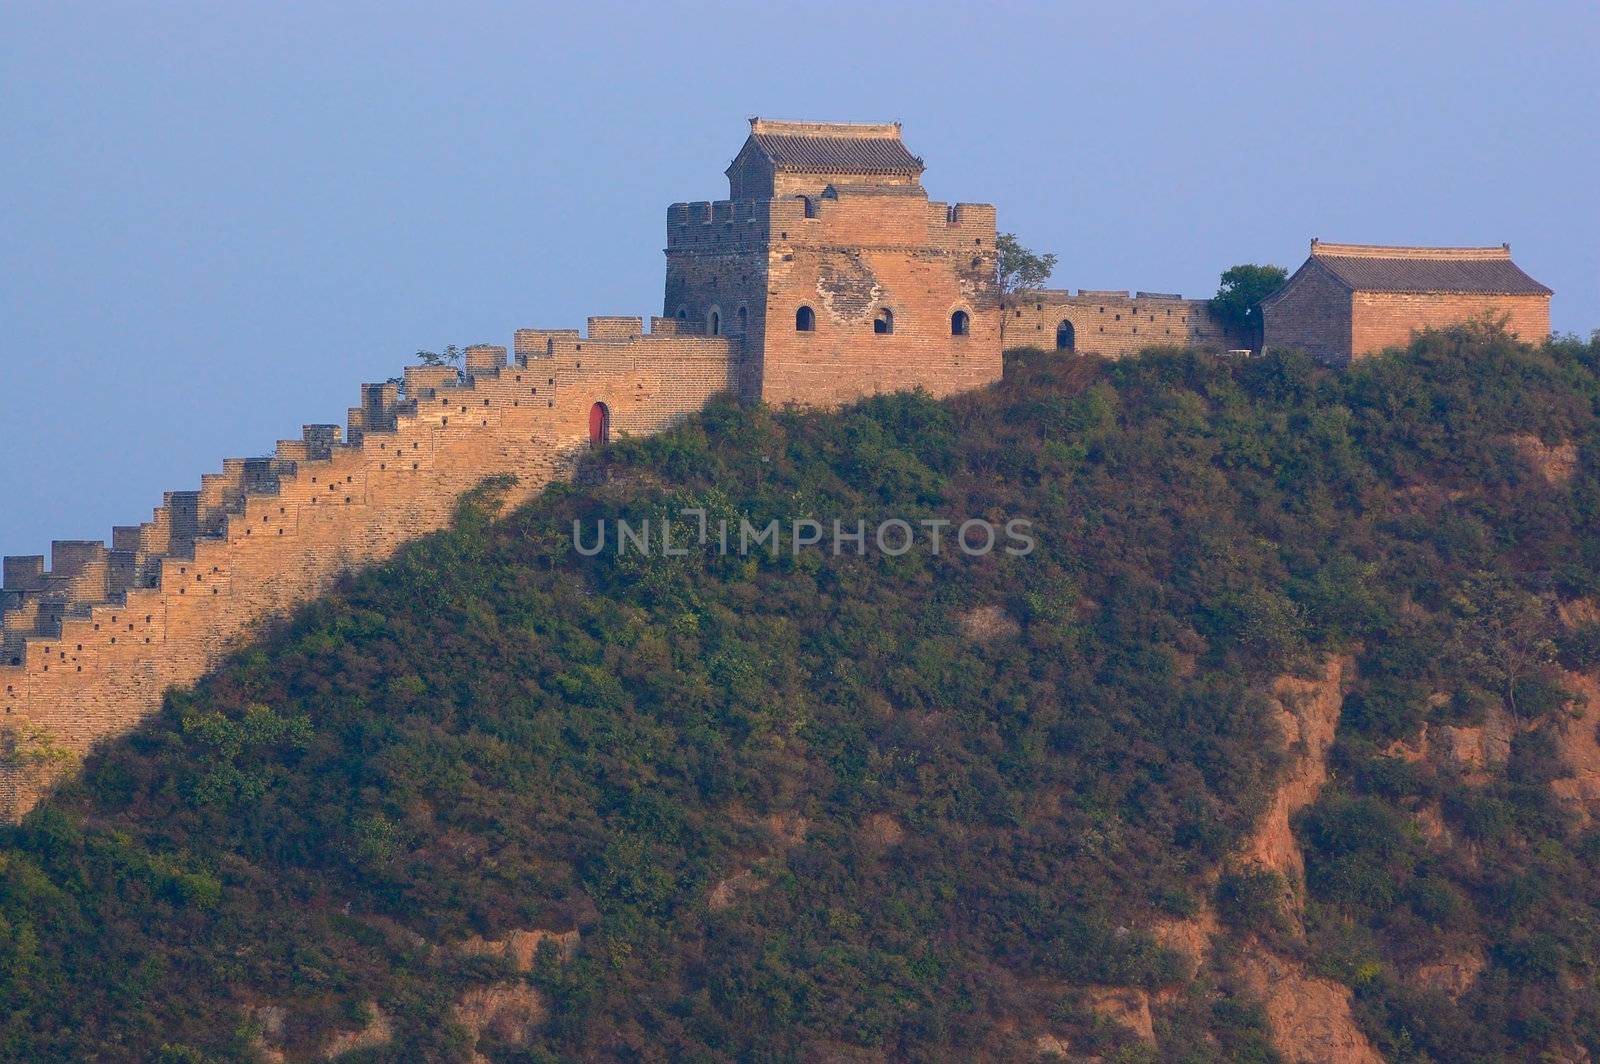 Great Wall of China built in the Ming Dynasty in Jinshanling, Hebei province, China